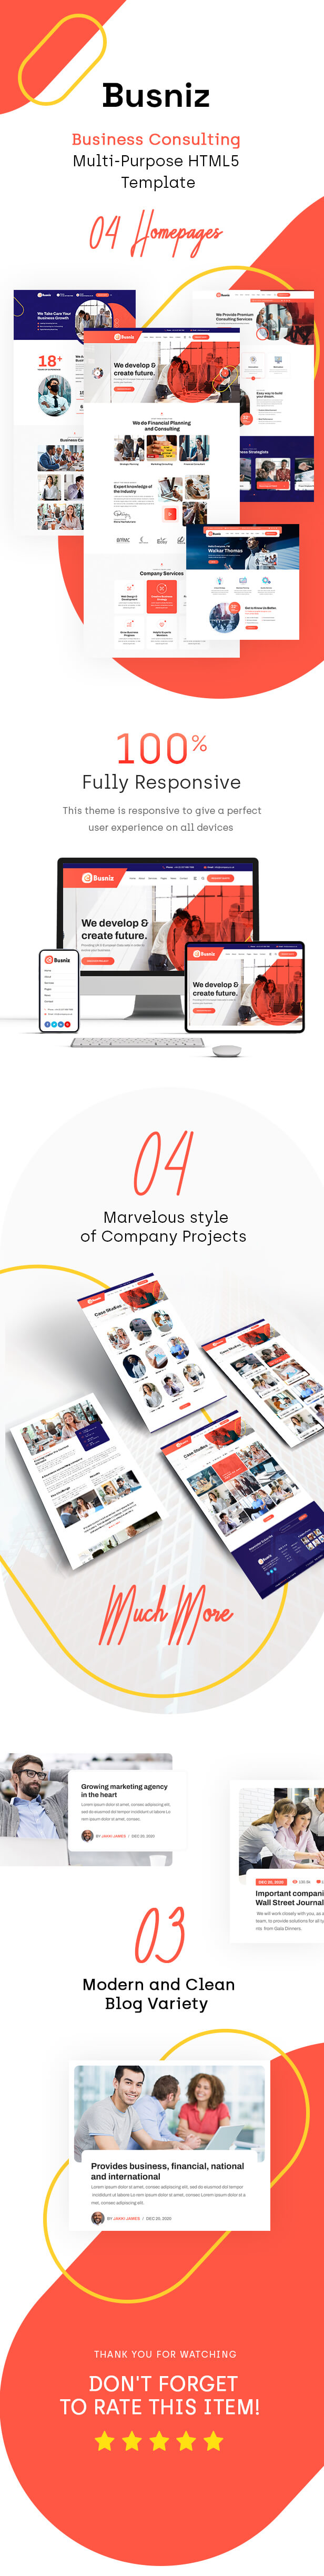 Busniz - Business Consulting Multi-Purpose HTML5 Template - 1